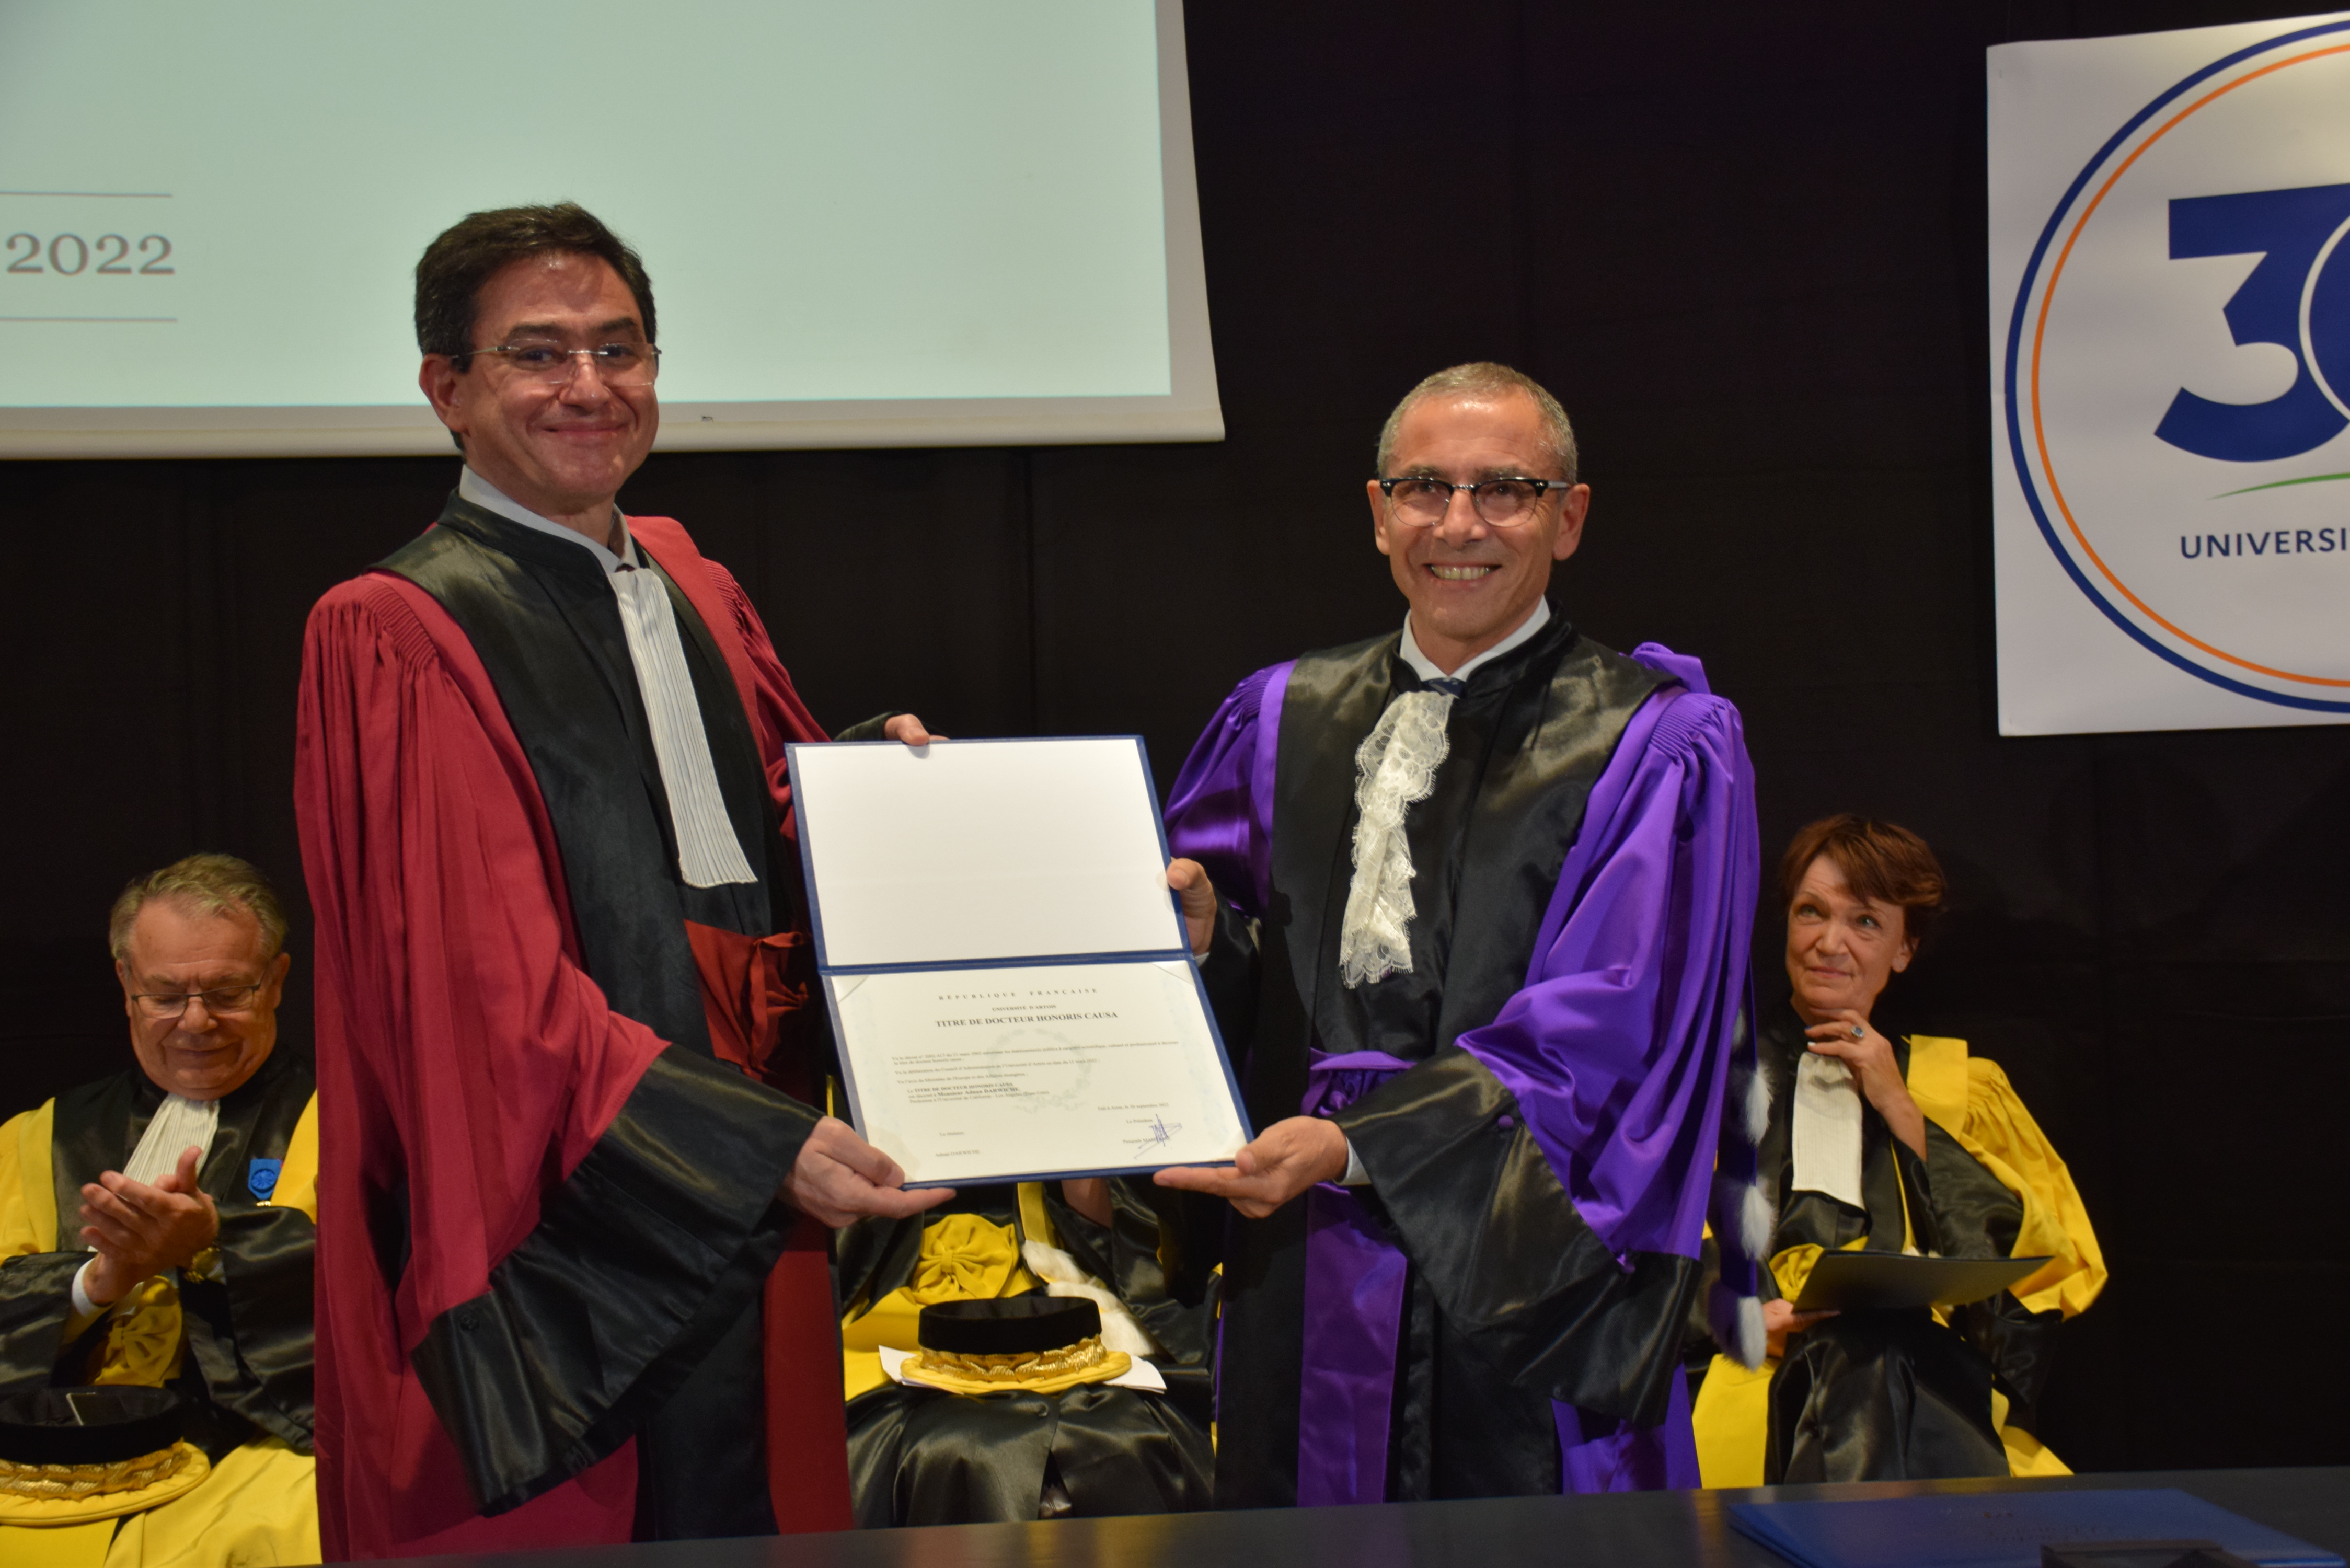 Adnan Darwiche receiving honorary doctorate at University of Artois, France